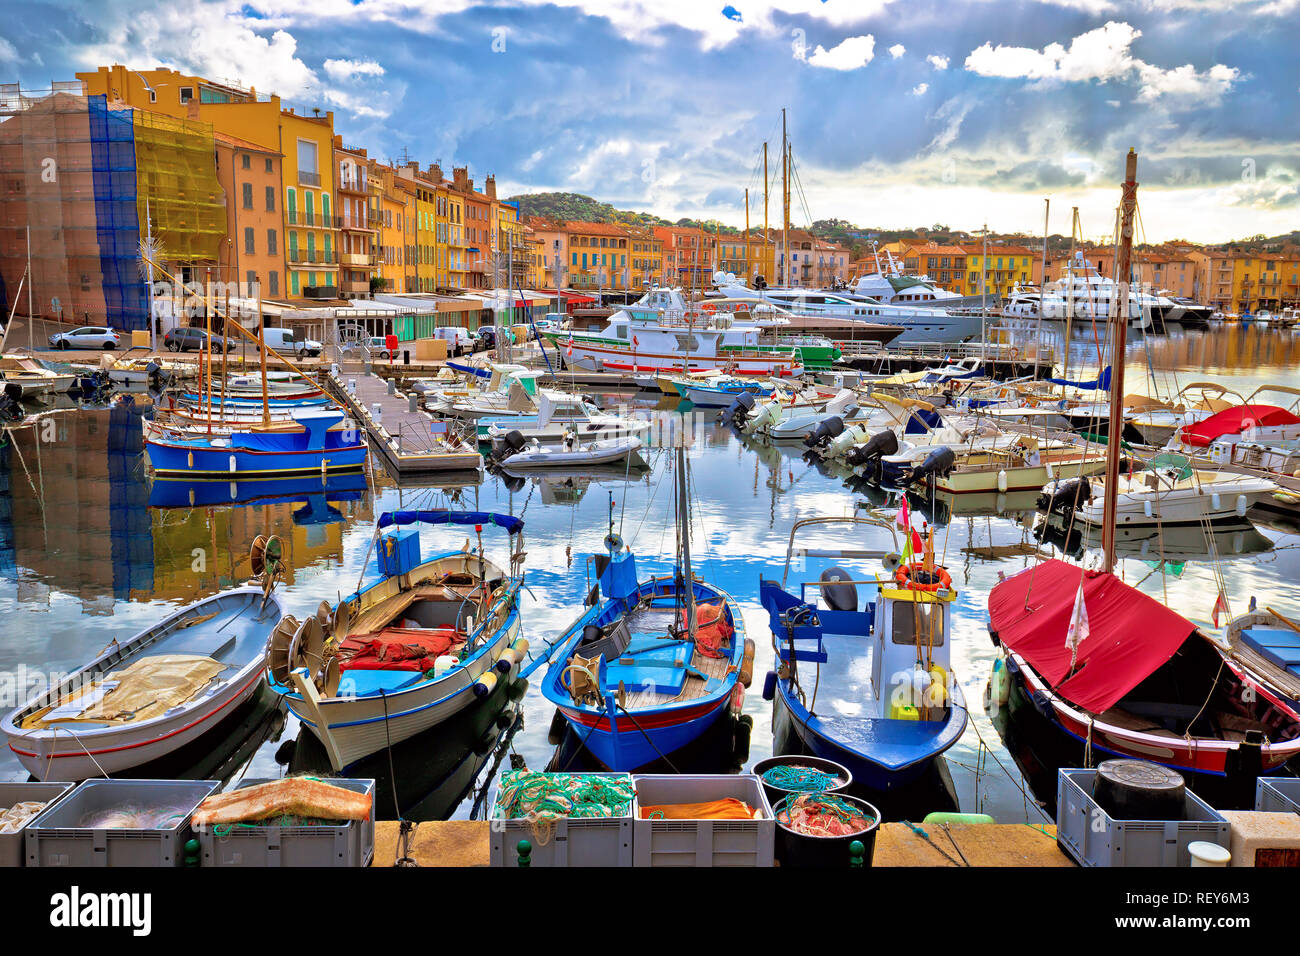 Colorful harbor of Saint Tropez at Cote d Azur view, Alpes-Maritimes department in southern France Stock Photo